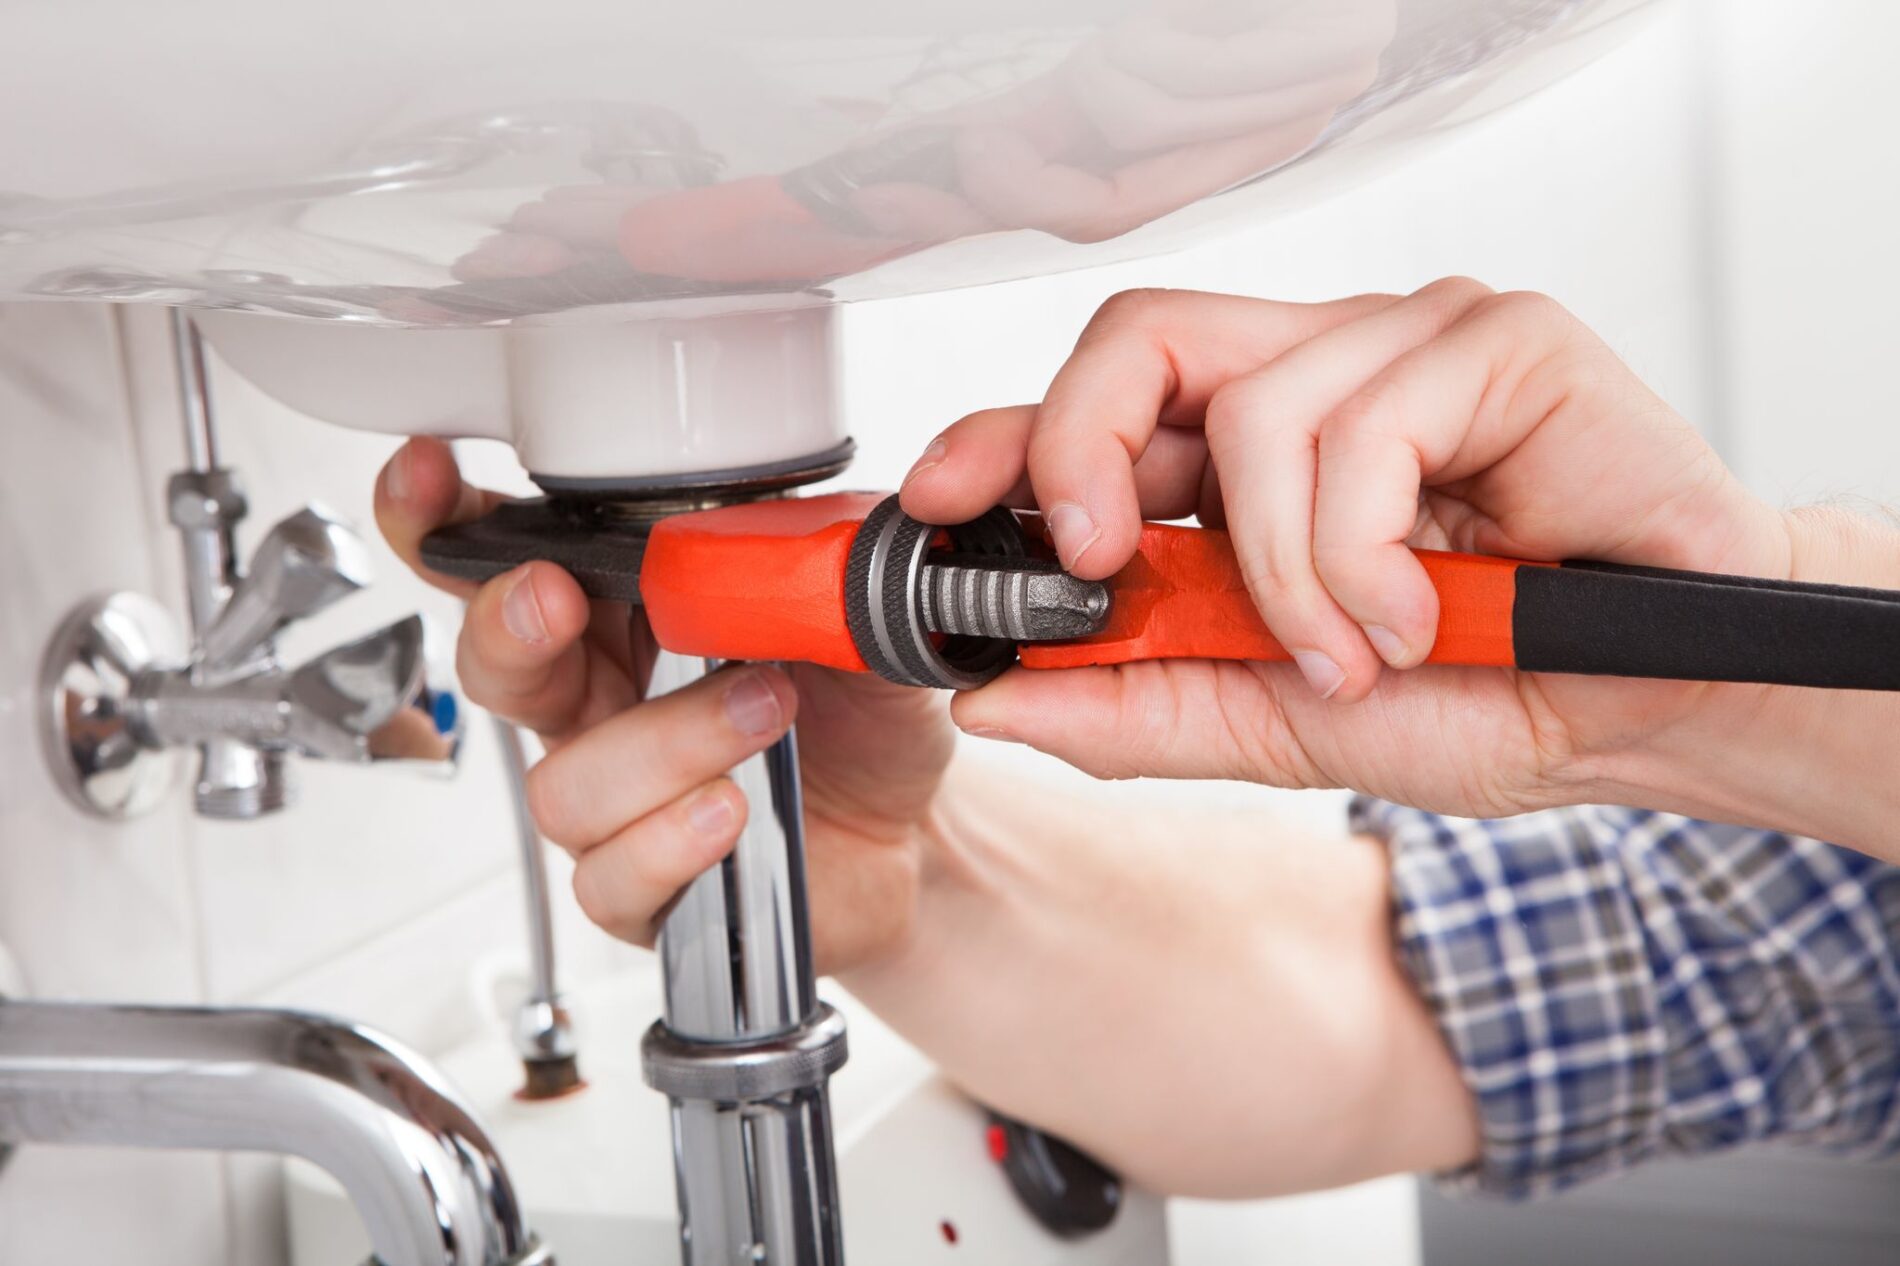 No.1 Professional Plumbing Services in Texas - J National